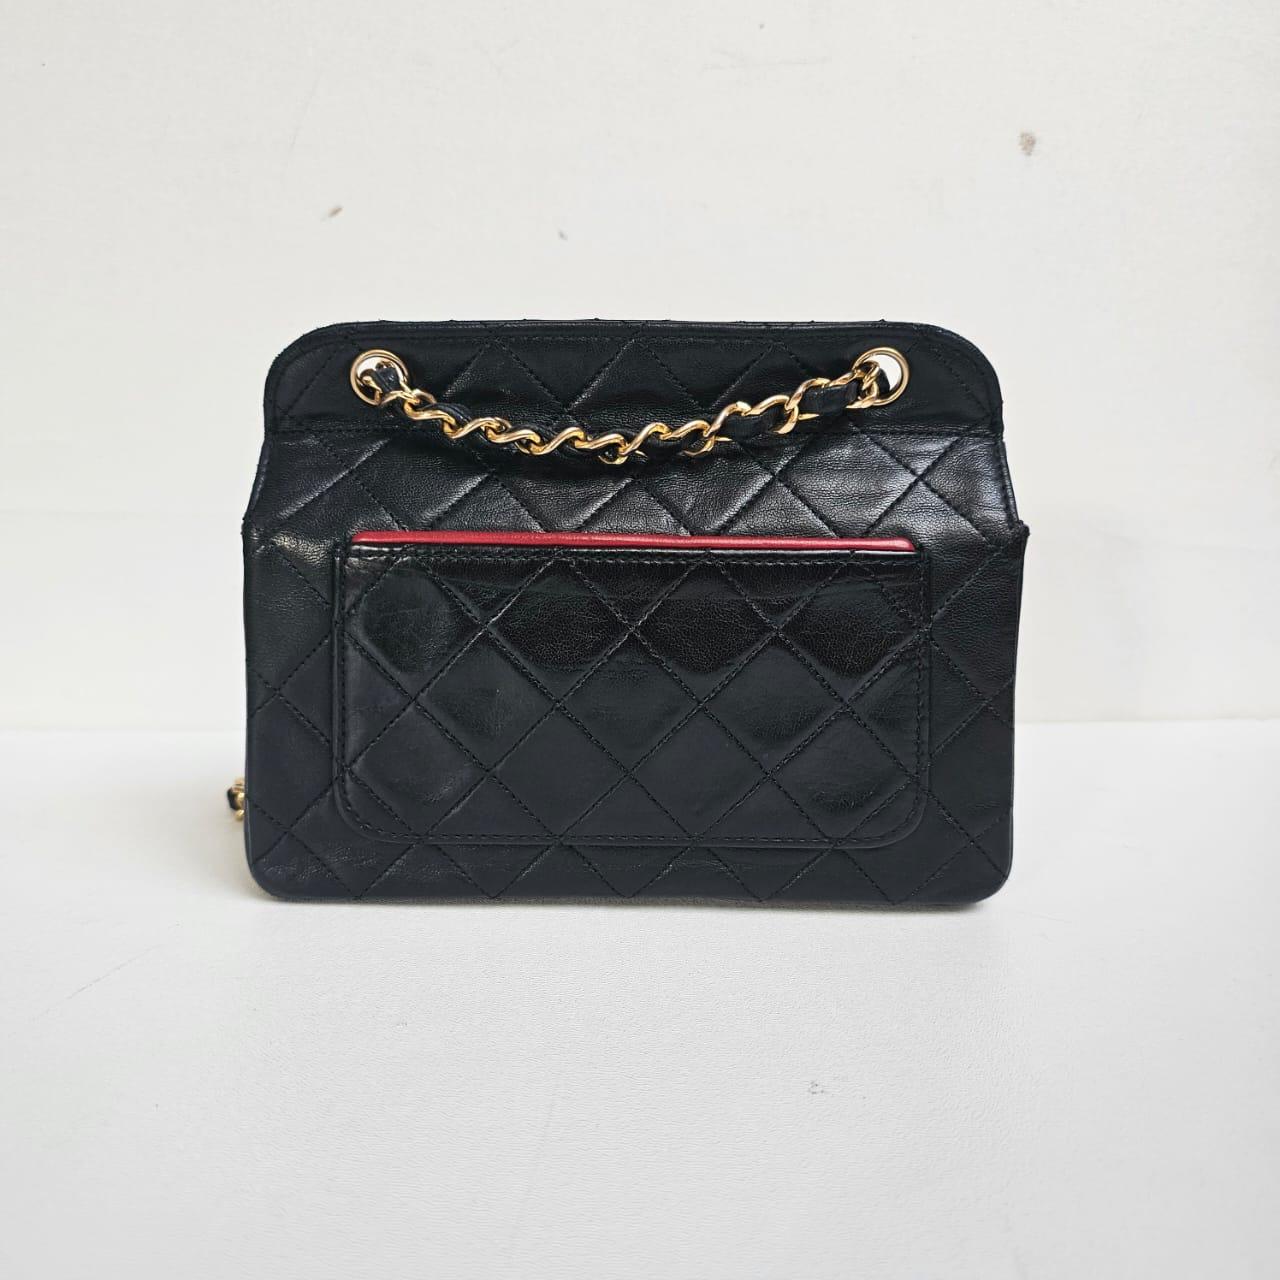 Vintage Chanel Black Lambskin Quilted Mini Flap Bag For Sale 5